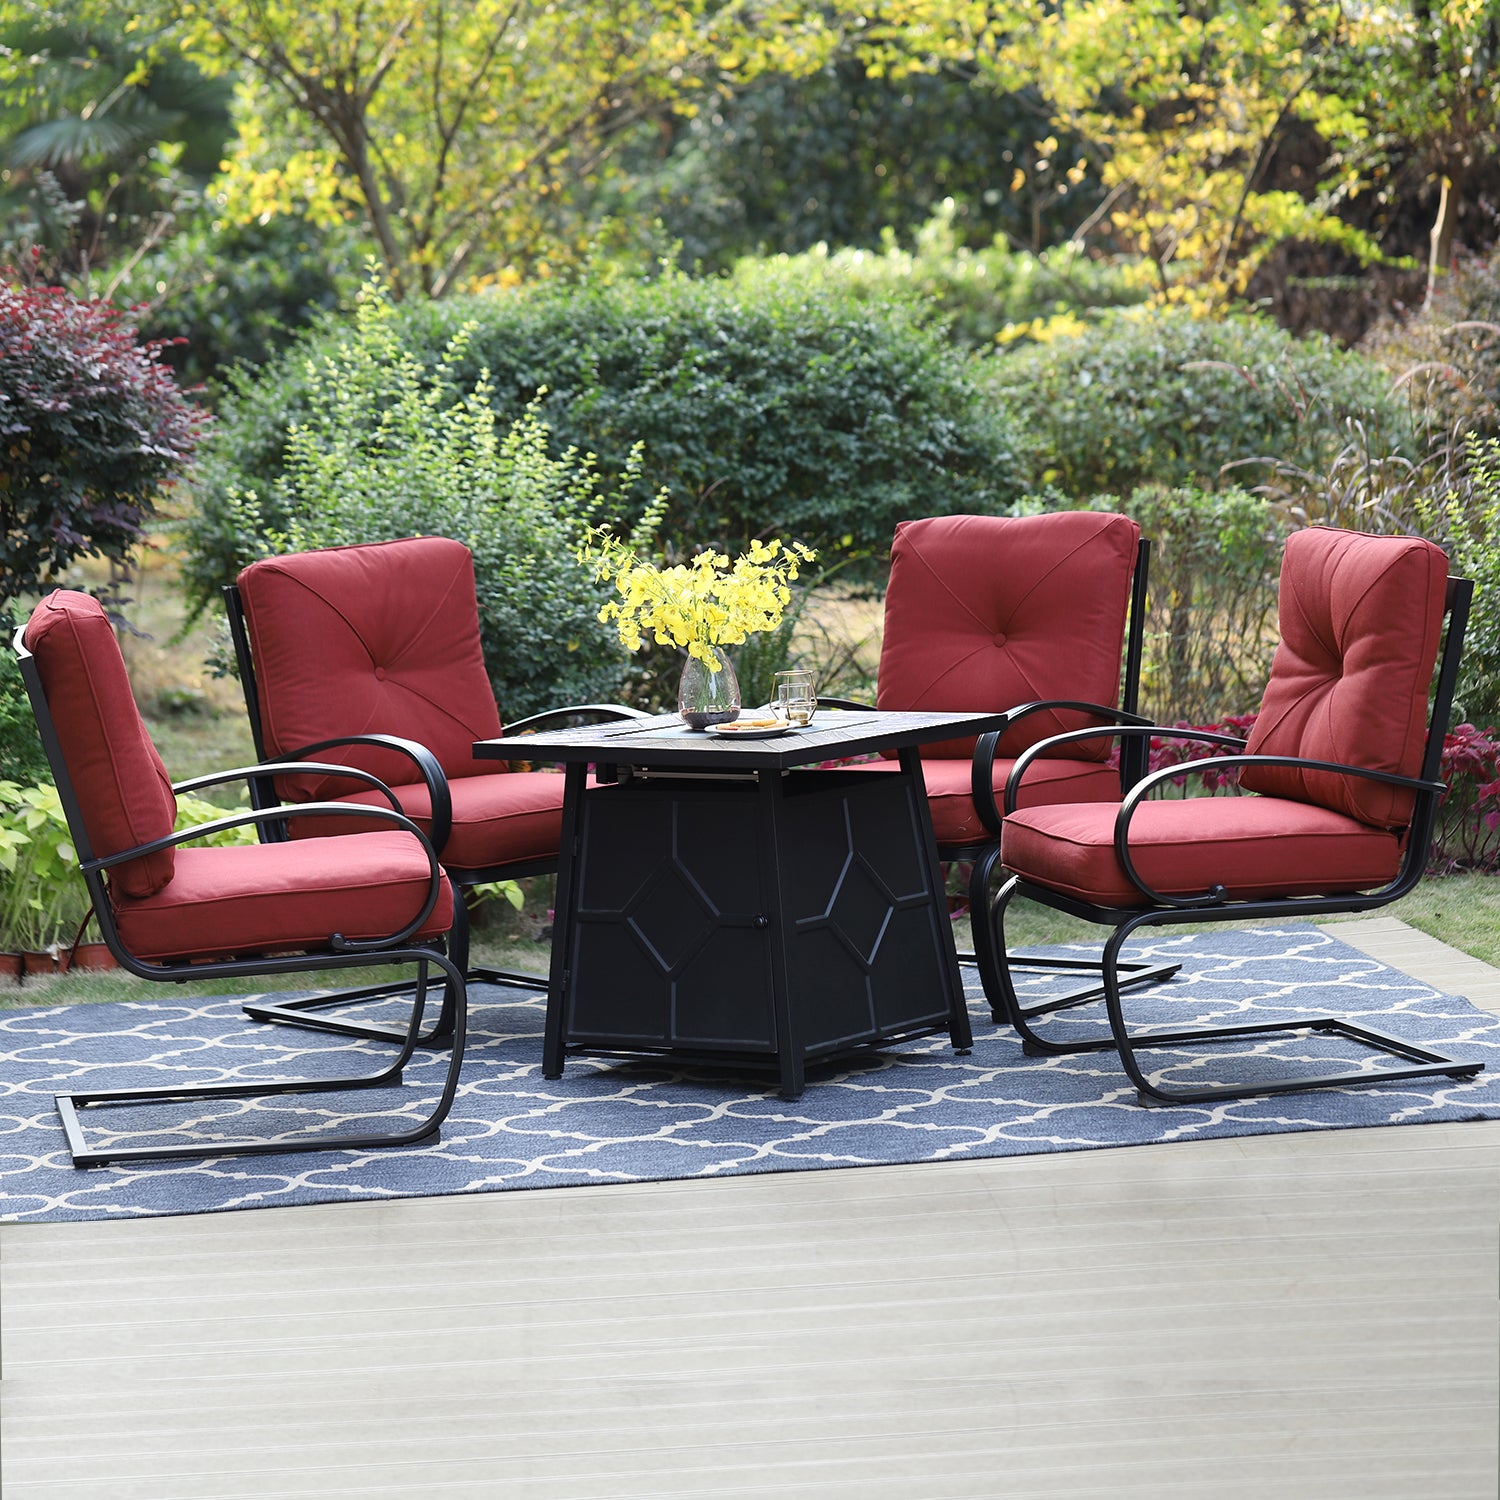 Sophia & William 5-Piece Gas Fire Pit Table Set 28" TerraFab Gas Fire Pit Table & Cushioned C-spring Chairs